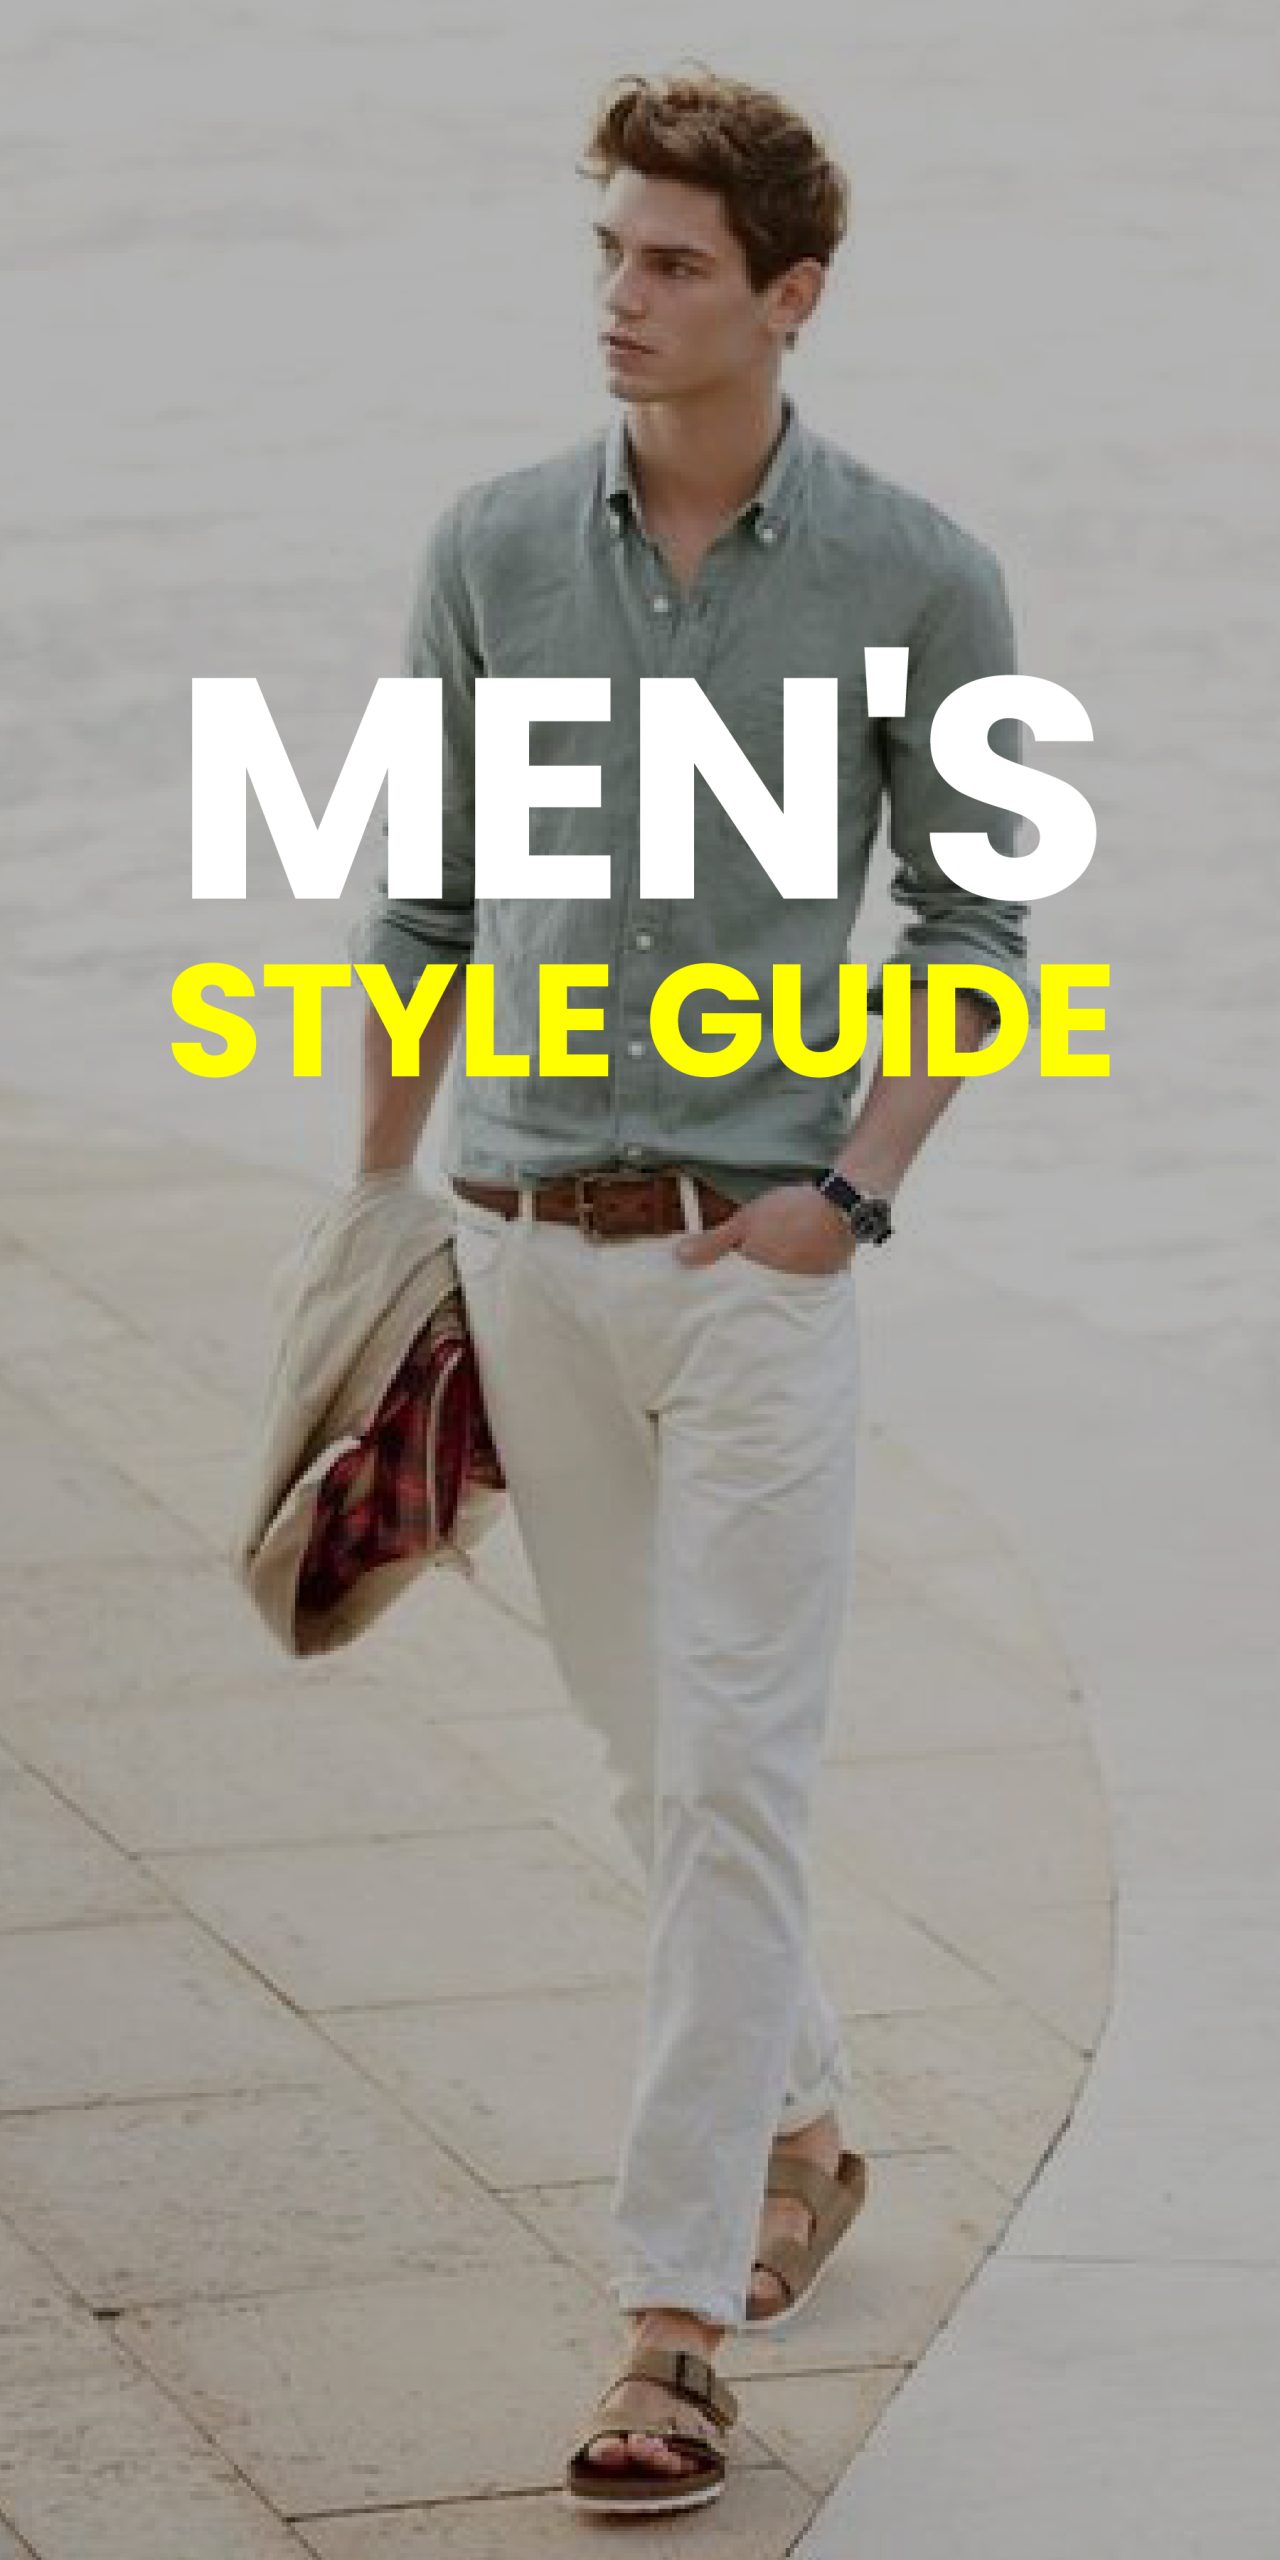 MEN’S STYLE GUIDE